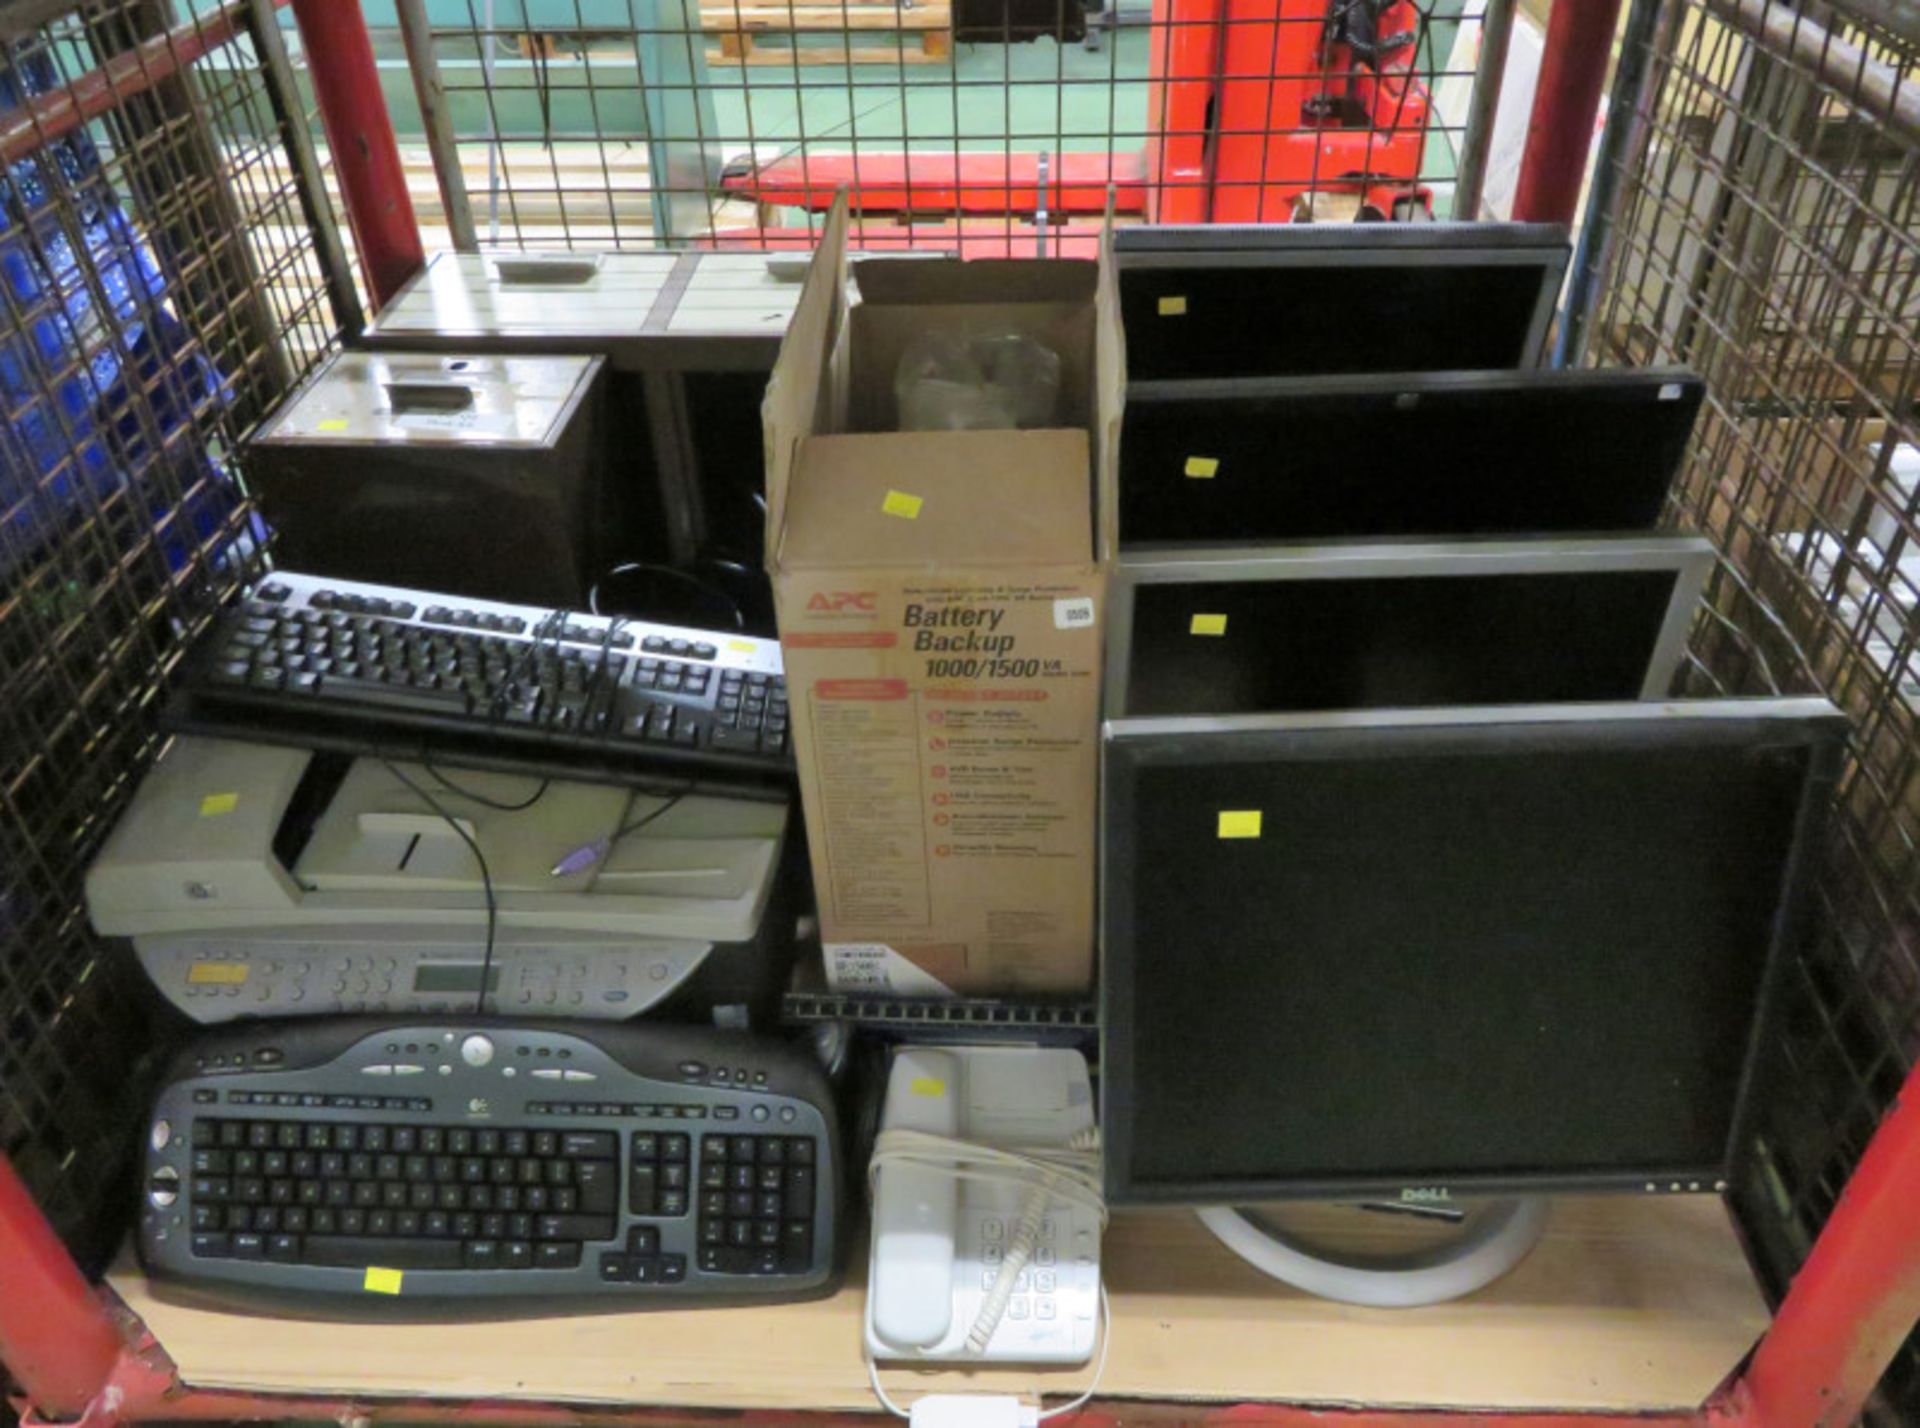 Office equipment - Monitors, keyboards, office drawers